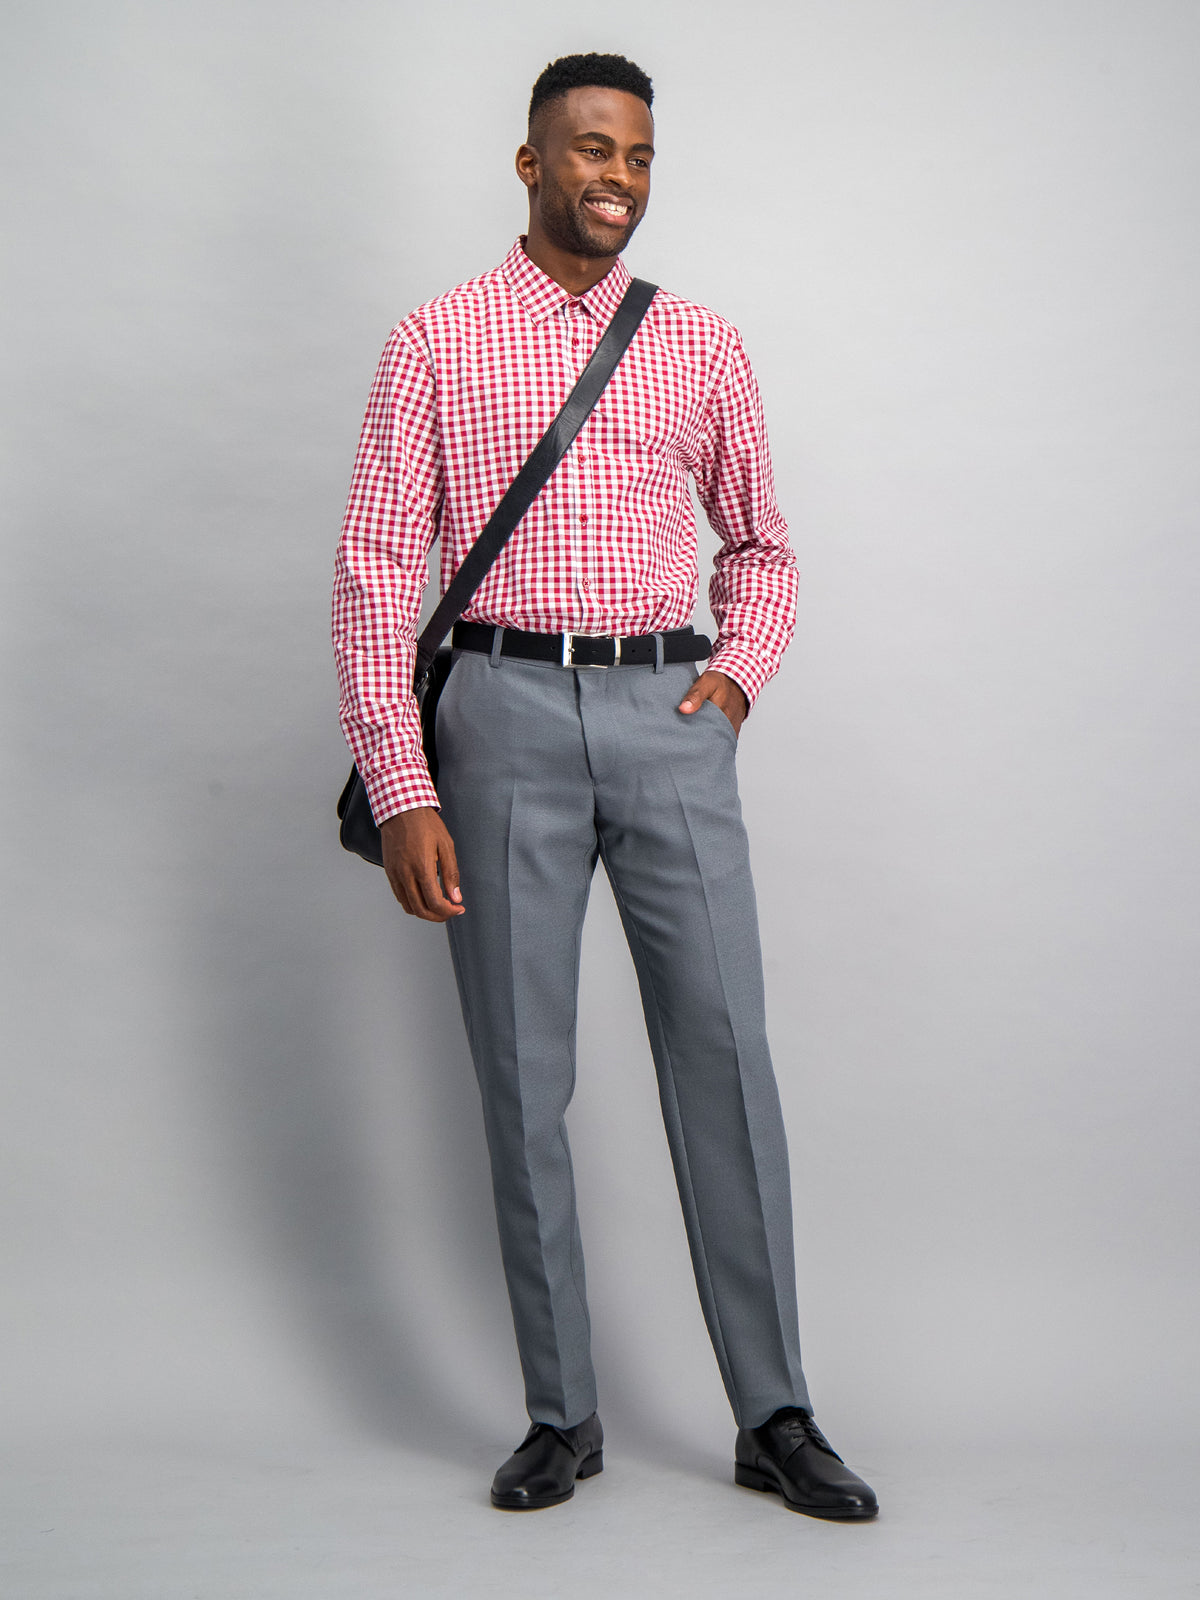 Dean slim fit cotton shirt- red gingham